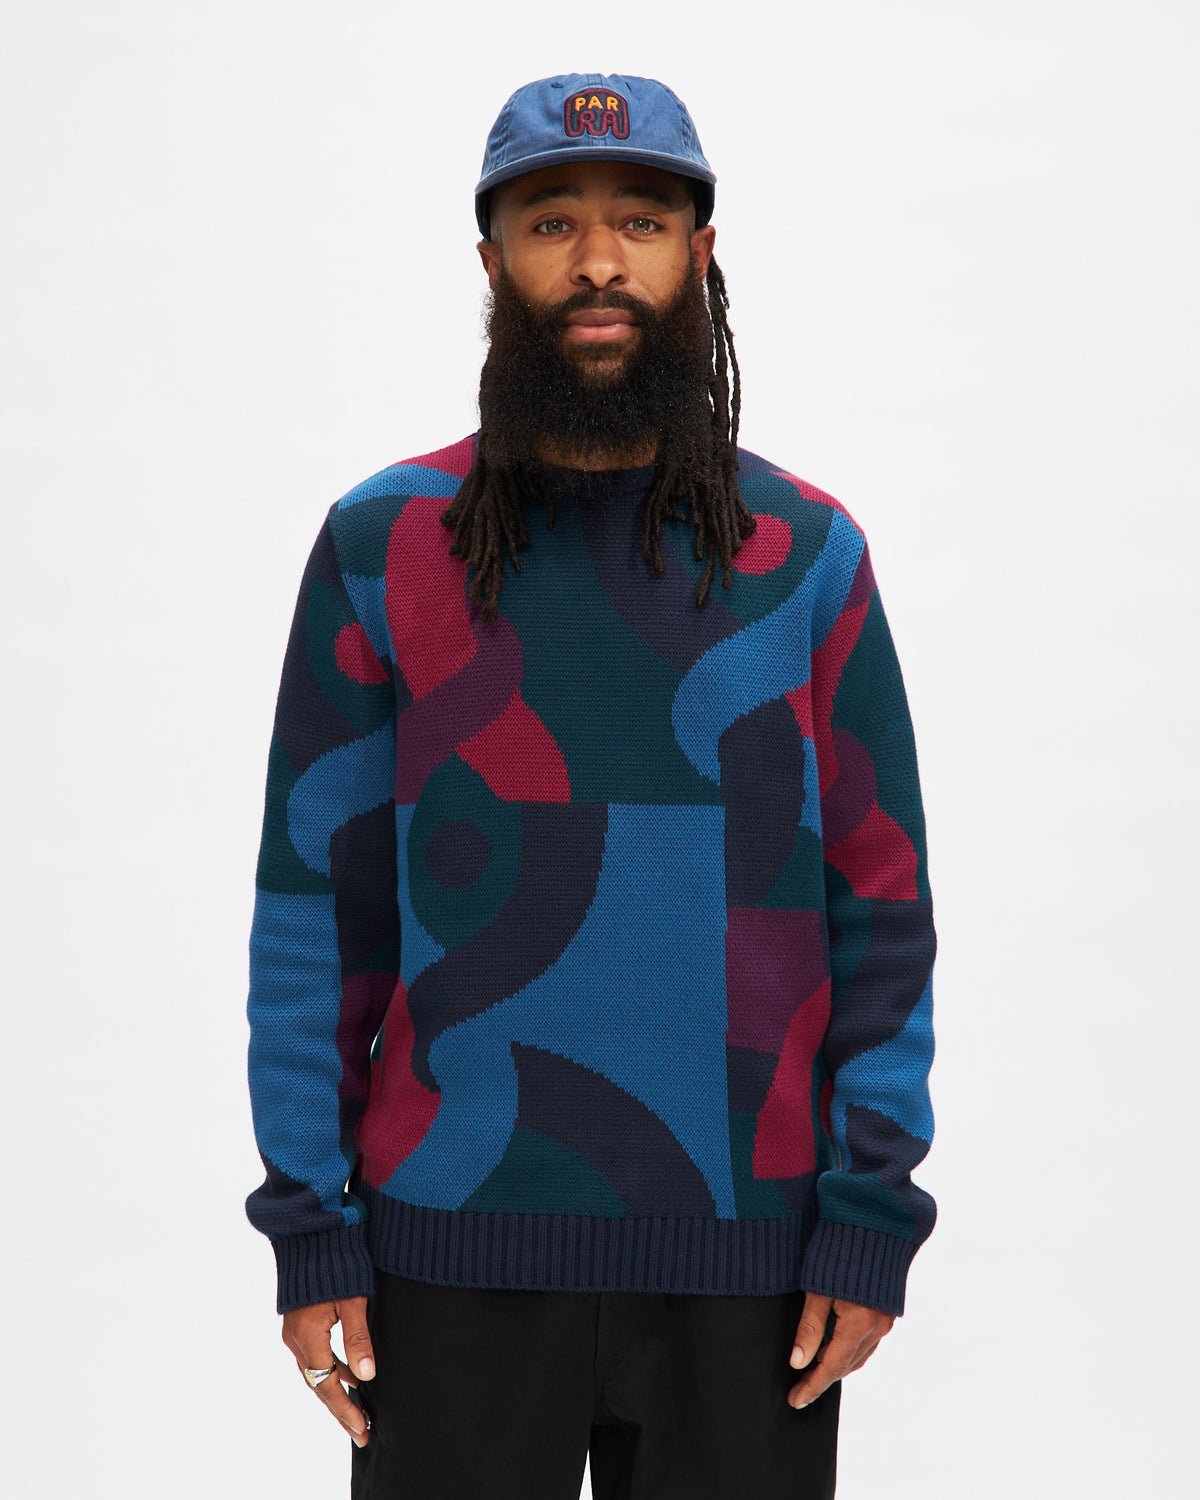 Knotted Knitted Pullover in Multi